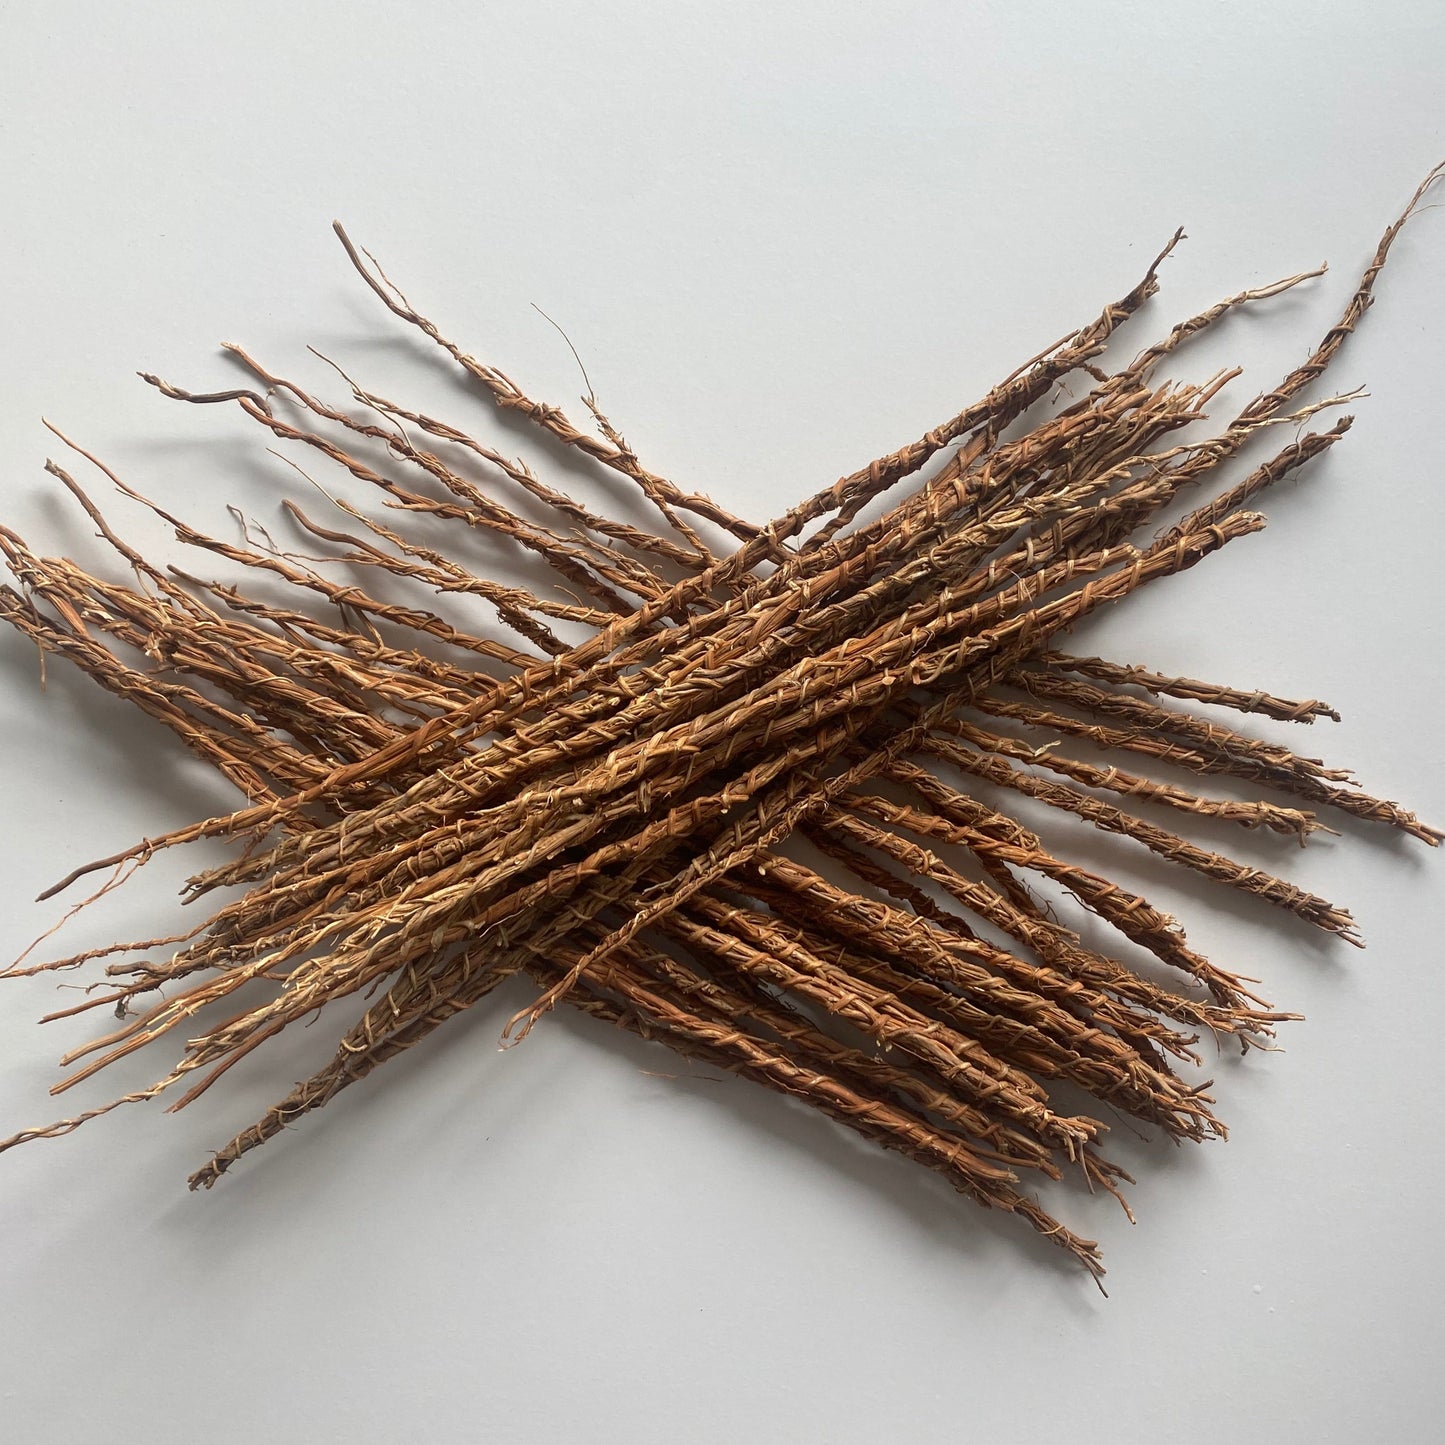 Lot of 10 stems - KHAMARE / GONGOLILI / Root of VETIVER - Plants - Spices,  Plants, Roots and Powders